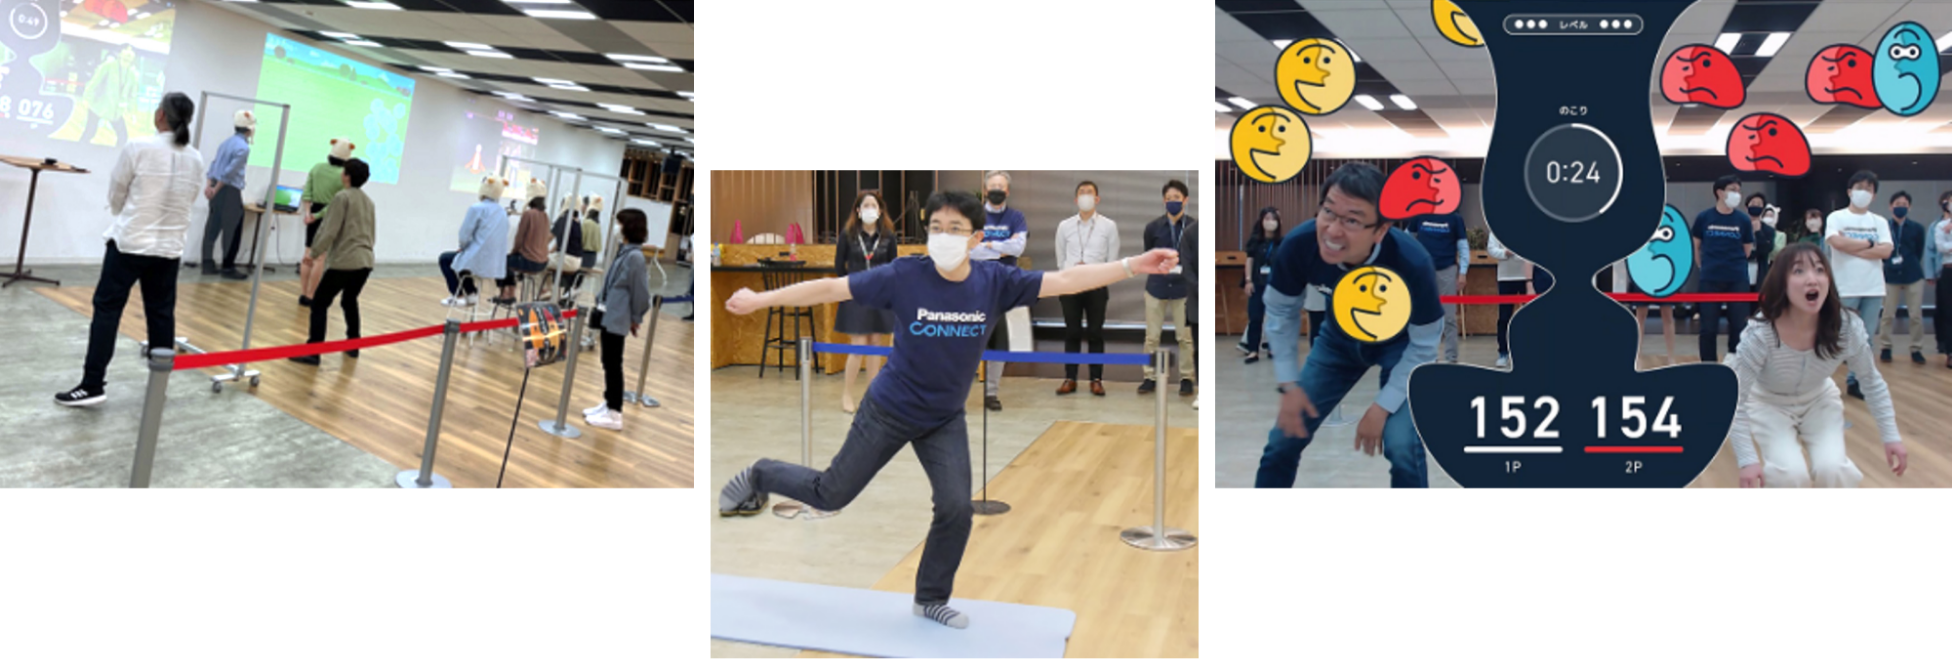 Photos: Scenes from Champ activity YURU SPORTS. Left: Participants enjoy the event while watching images projected on the wall. Center: A participant poses with their arms outstretched and stands on one leg. Right: Two participants compete in an event in which they imitate the facial expressions of the illustrations on the screen. The employee on the left is gritting their teeth, while the one on the right looks surprised.